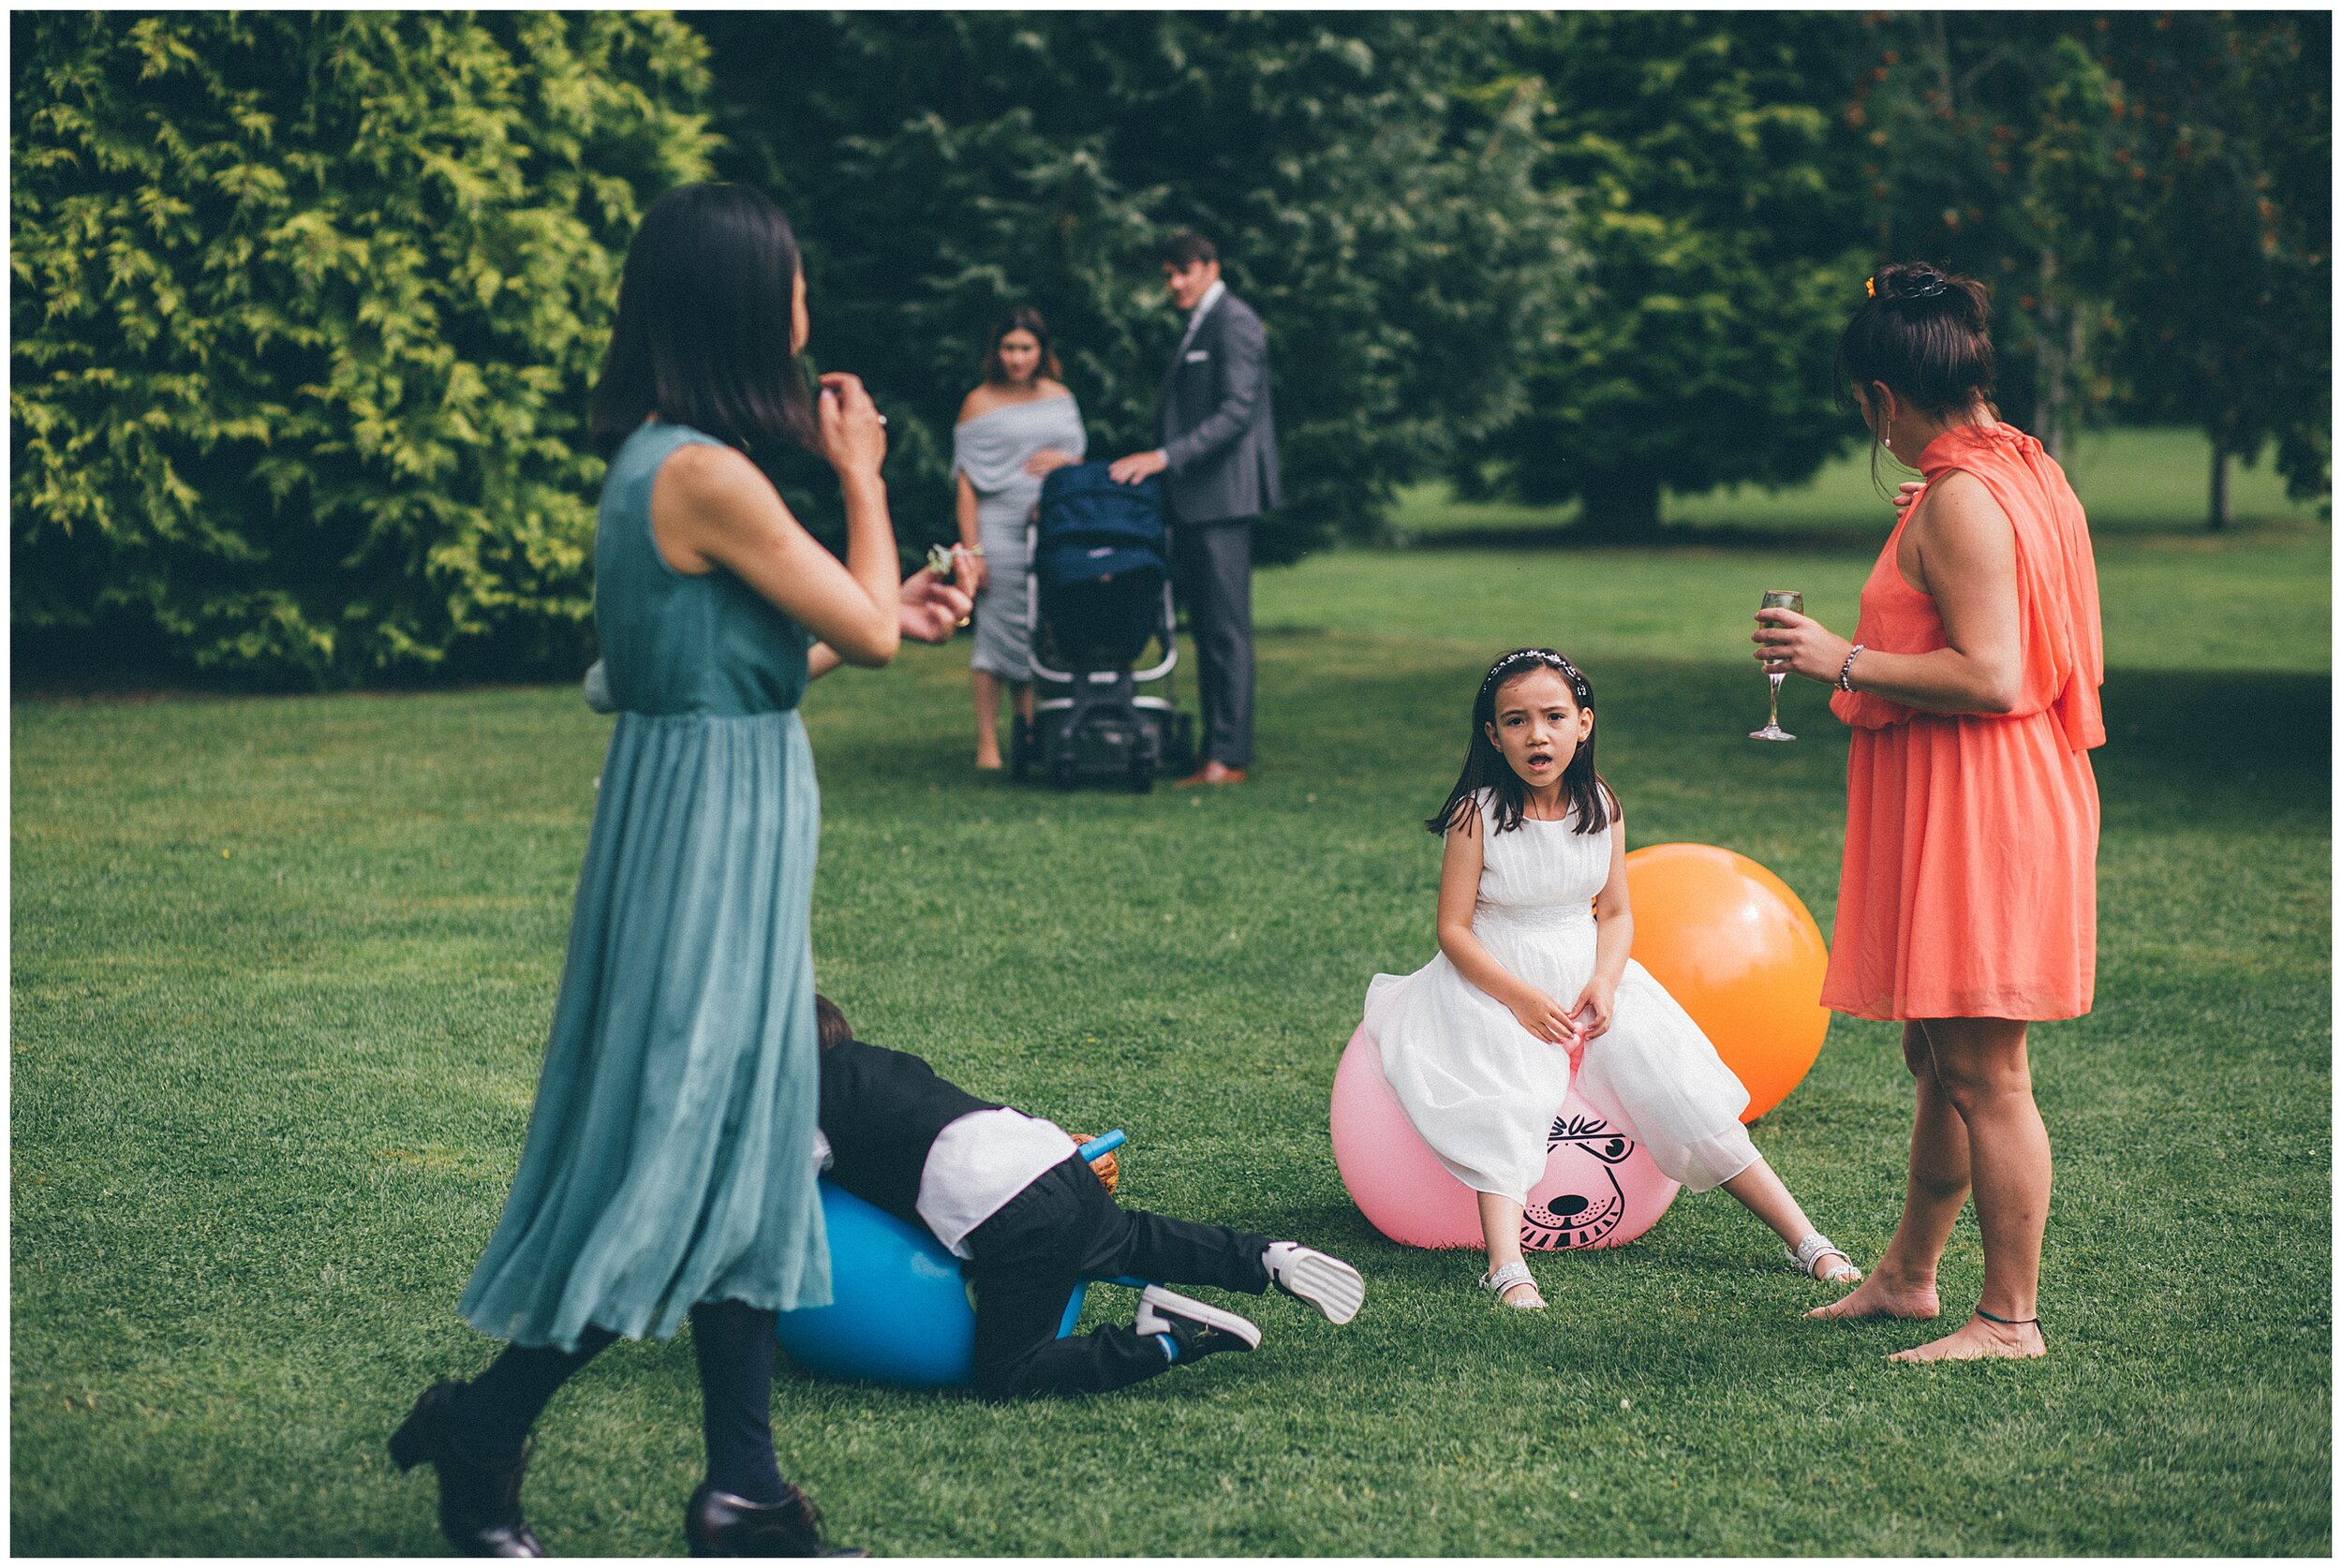 Children playing on space hoppers at summer wedding.